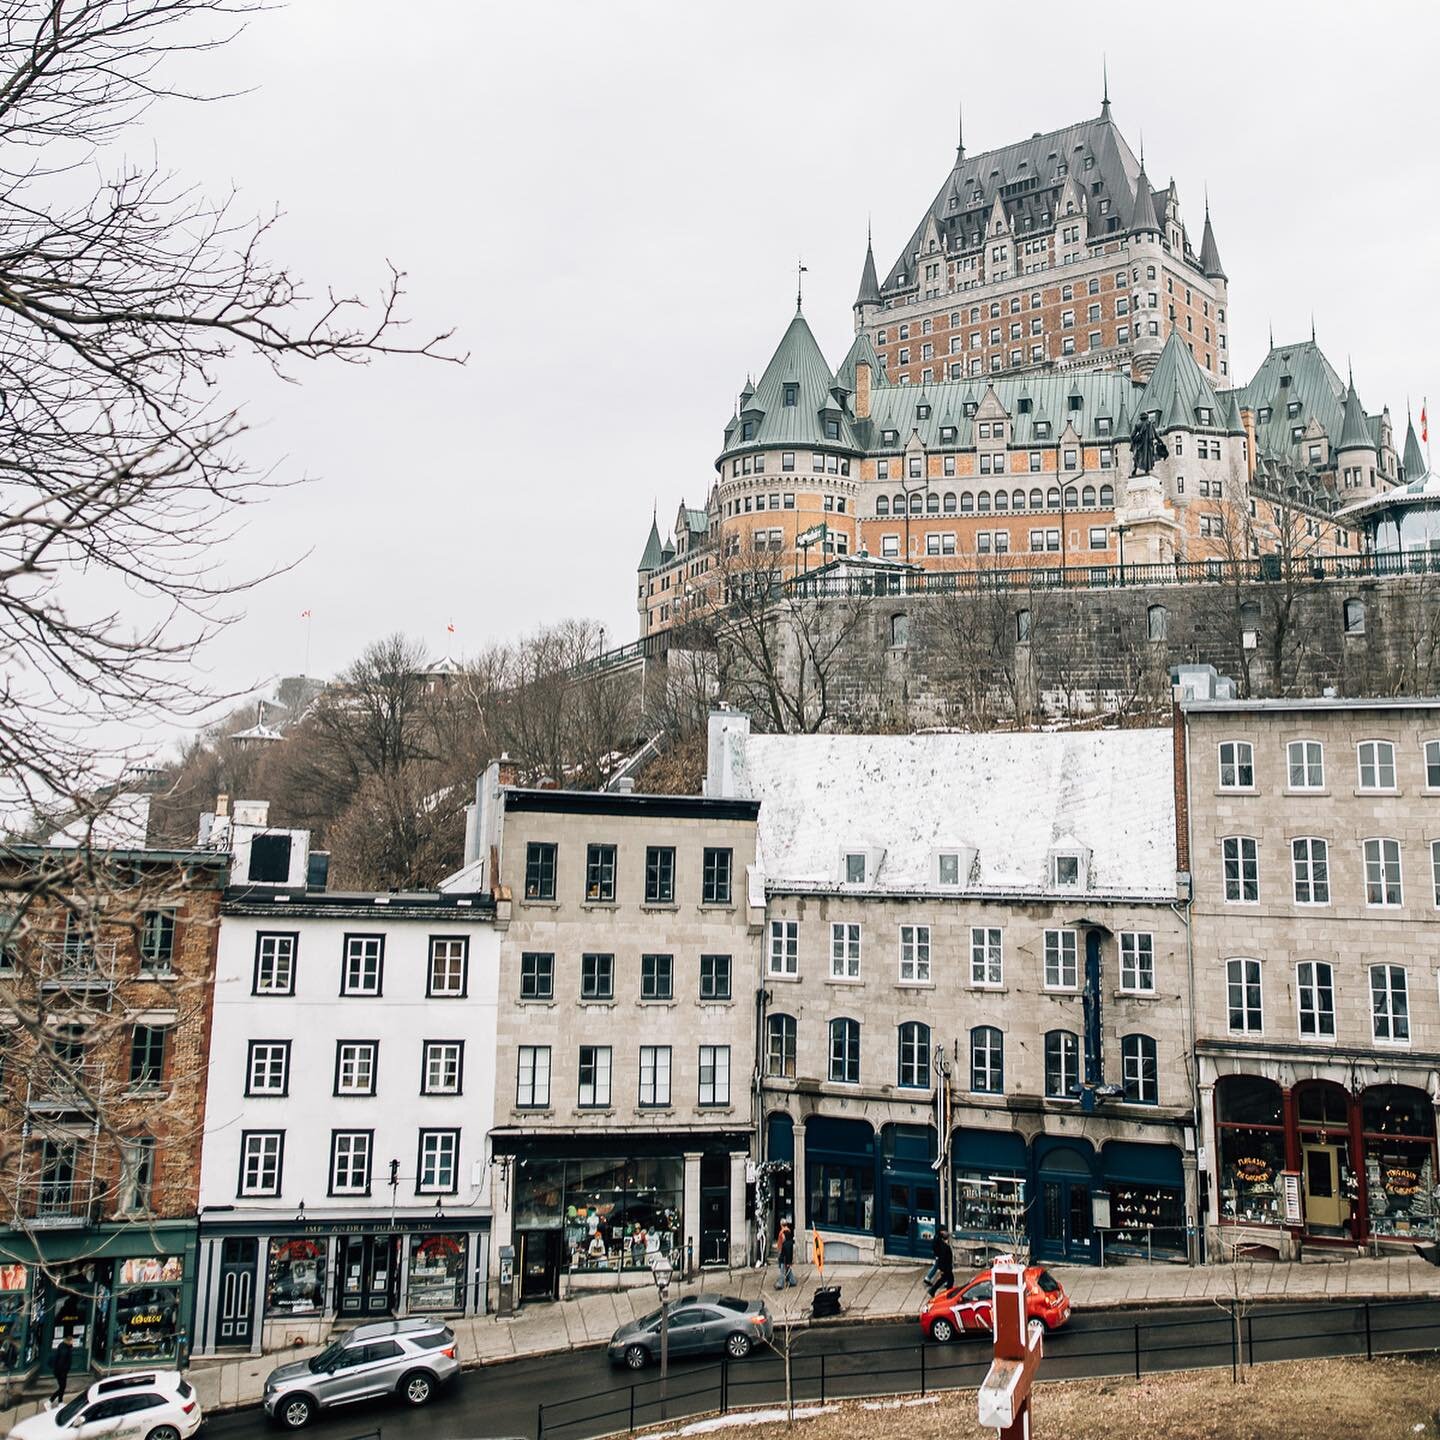 10 images from my trip to Montreal and Quebec City for Spring break taking the #adirondack train from NYC. The ride was lovely and I spotted lots of animals, bald eagle 🦅 included (I am a true American now!😂). The kids entertain themselves but it h